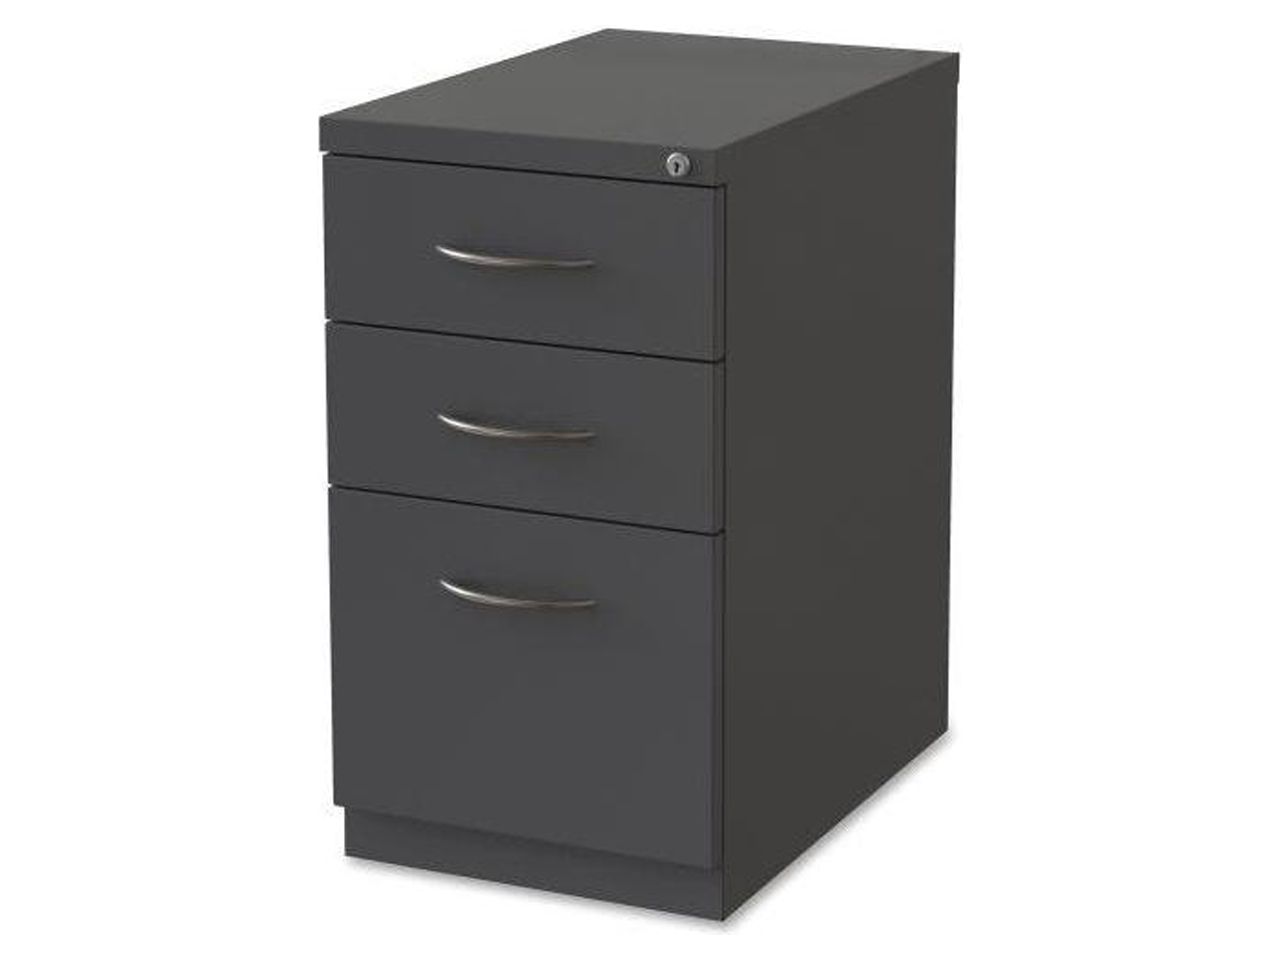 3 Drawers Vertical Steel Lockable Filing Cabinet, Gray - image 3 of 3